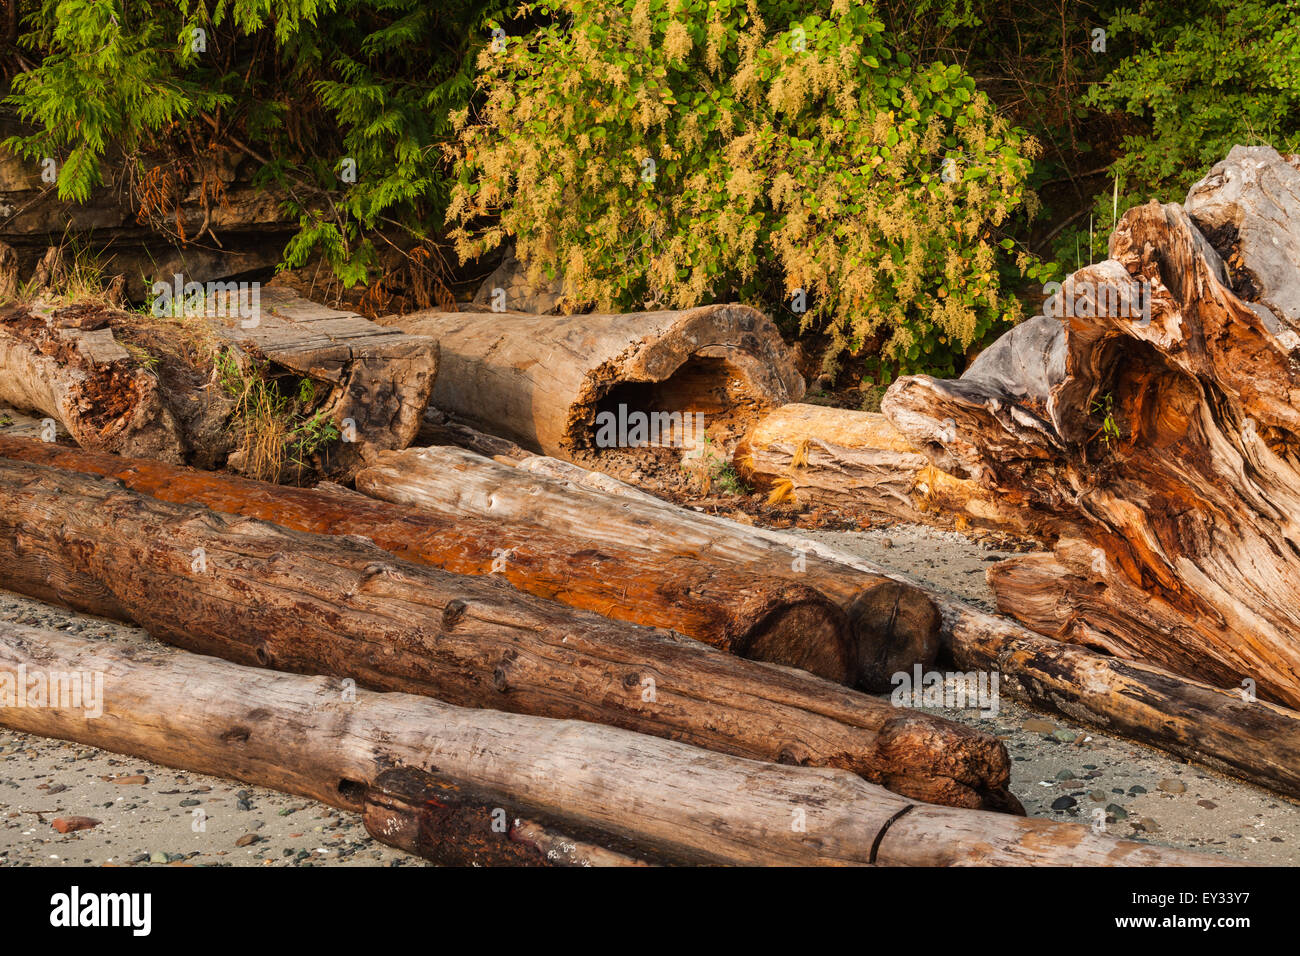 Driftwood on a beach of Protection Island, British Columbia, Canada Stock Photo